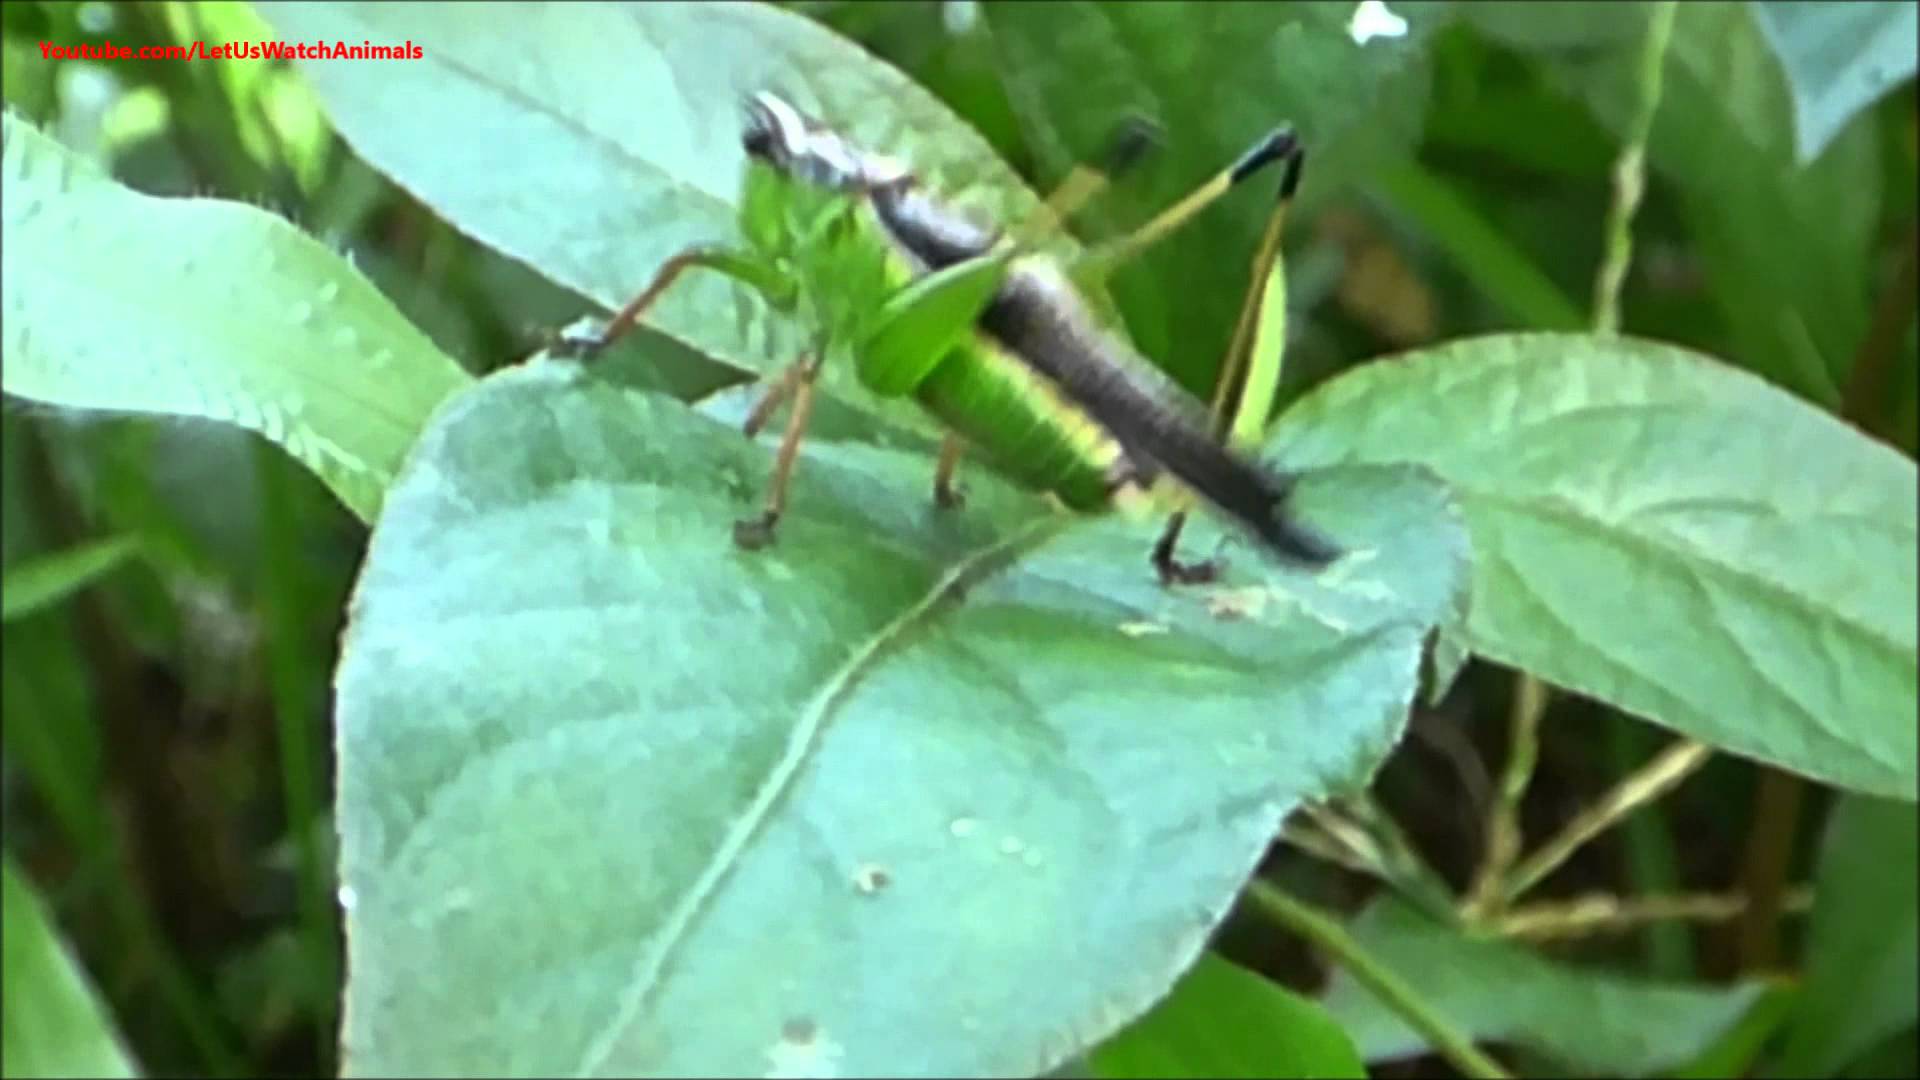 Green Cricket Making Sounds - YouTube